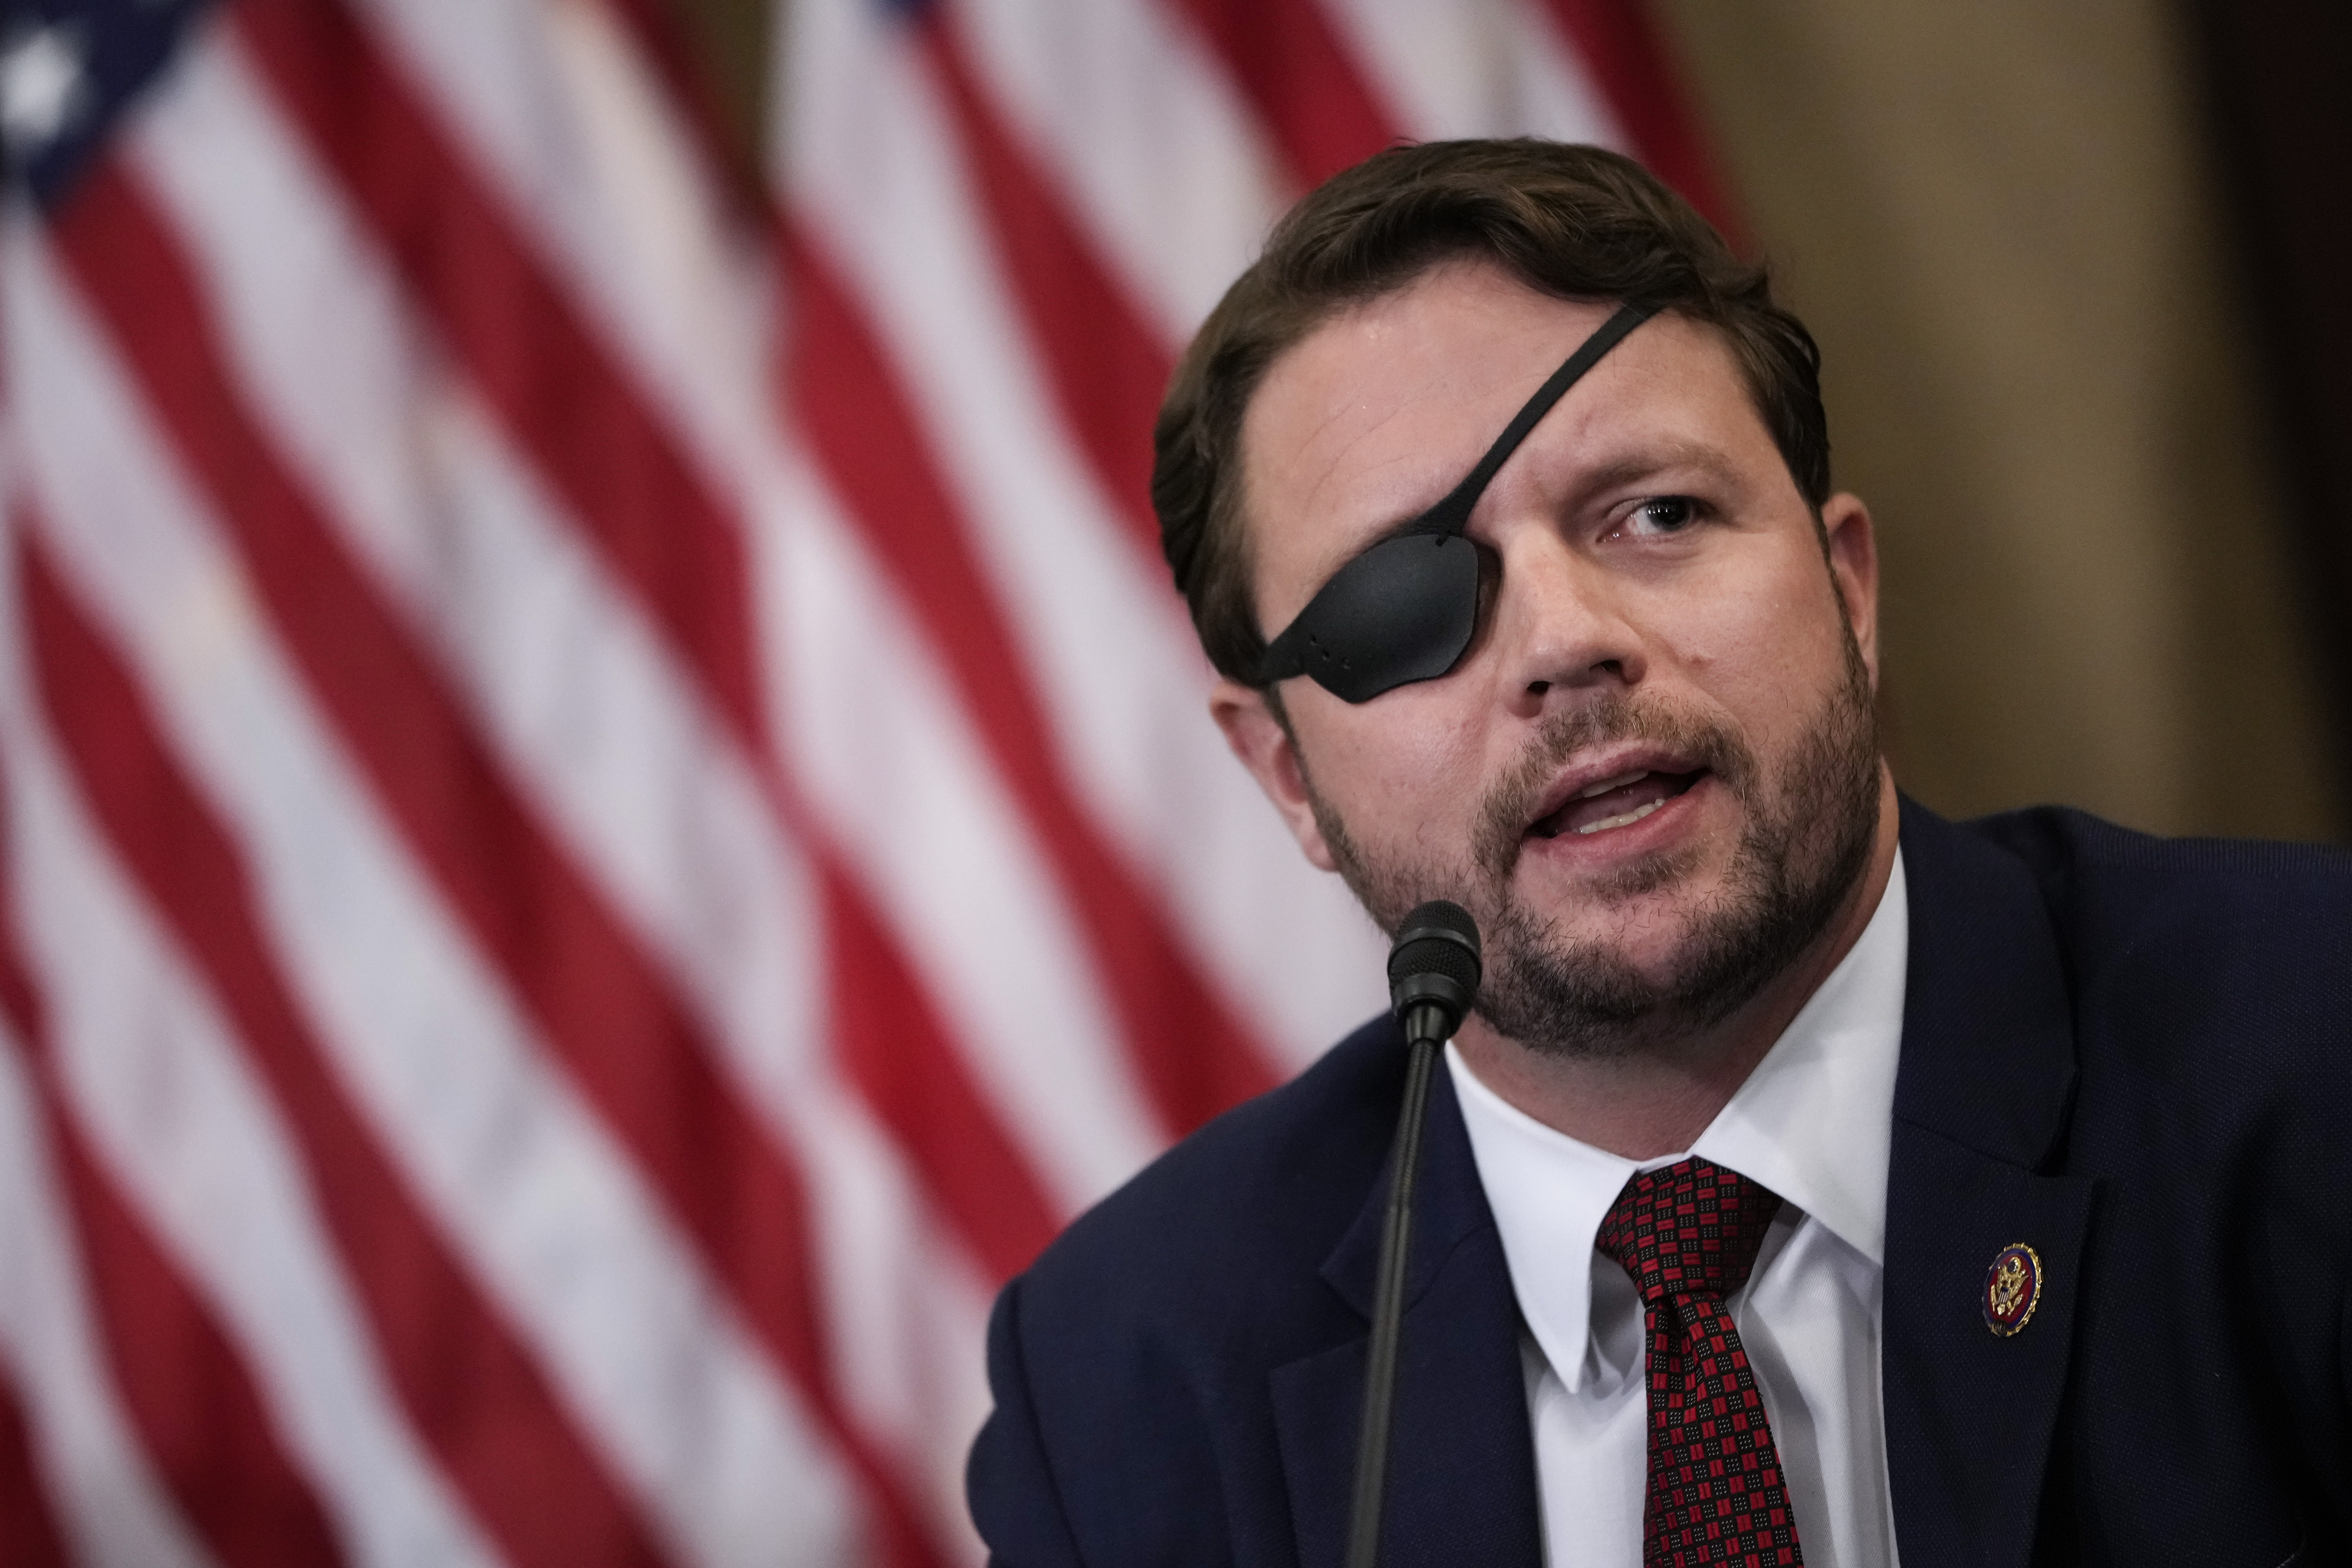 Rep. Dan Crenshaw (R-Texas) in Washington, D.C. (Photo by Drew Angerer/Getty Images)